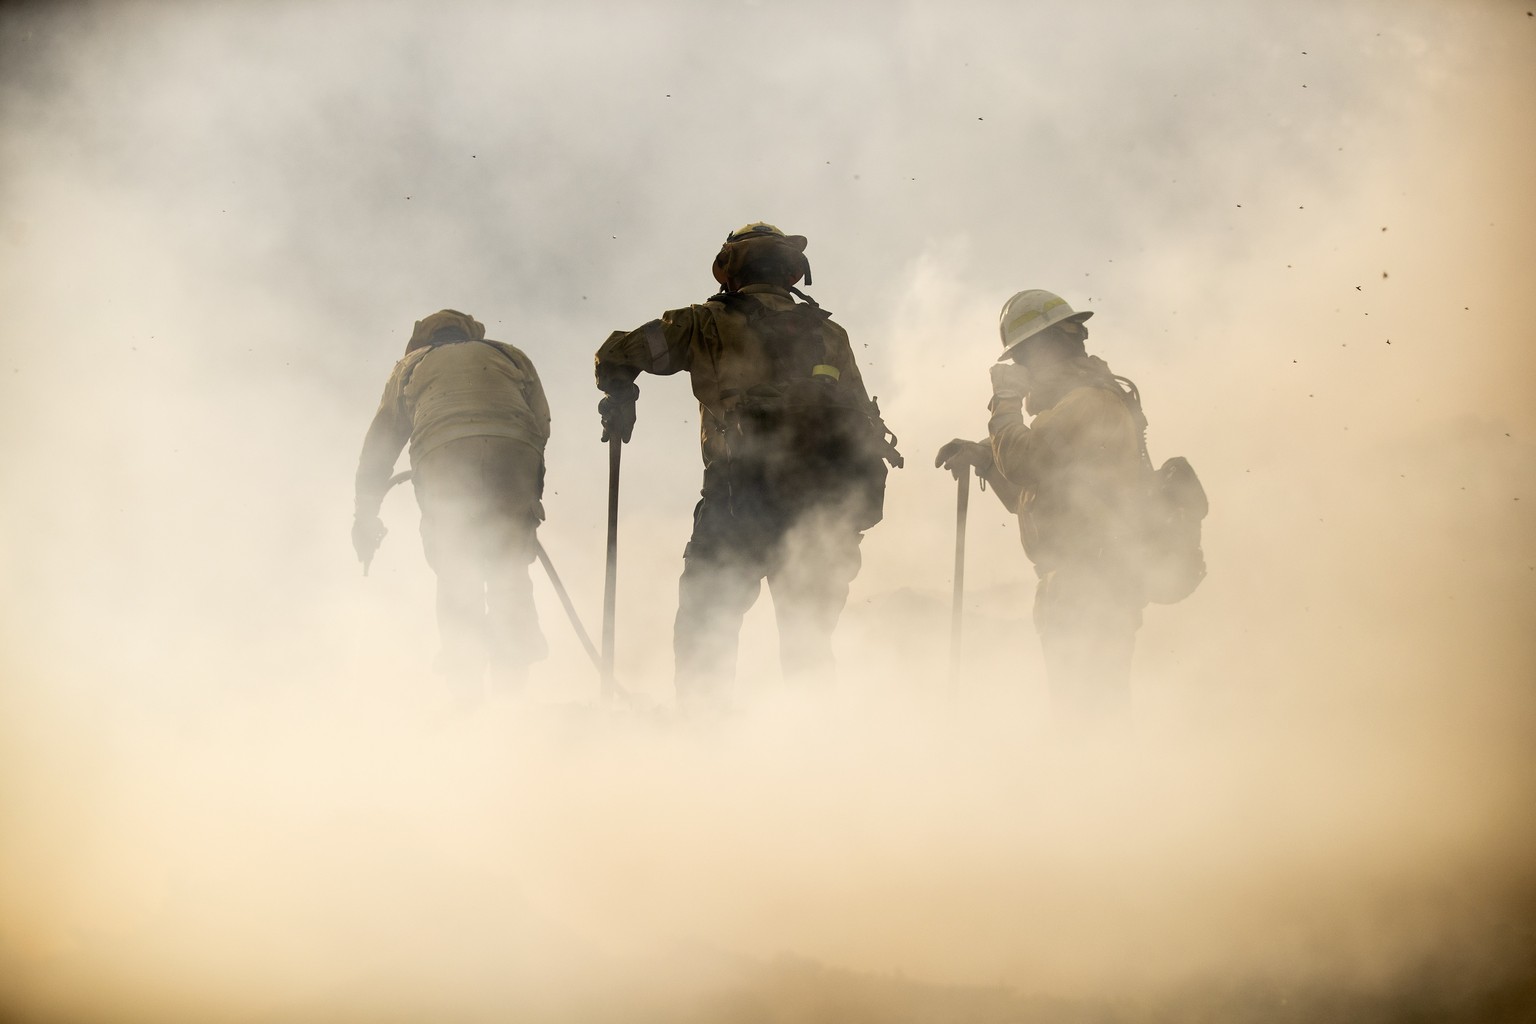 epa07916517 Firefighters work to extinguish the Saddleridge Fire burning in the hills between Sylmar and Santa Clarita, California, USA, 12 October 2019. According to the latest reports evacuation ord ...